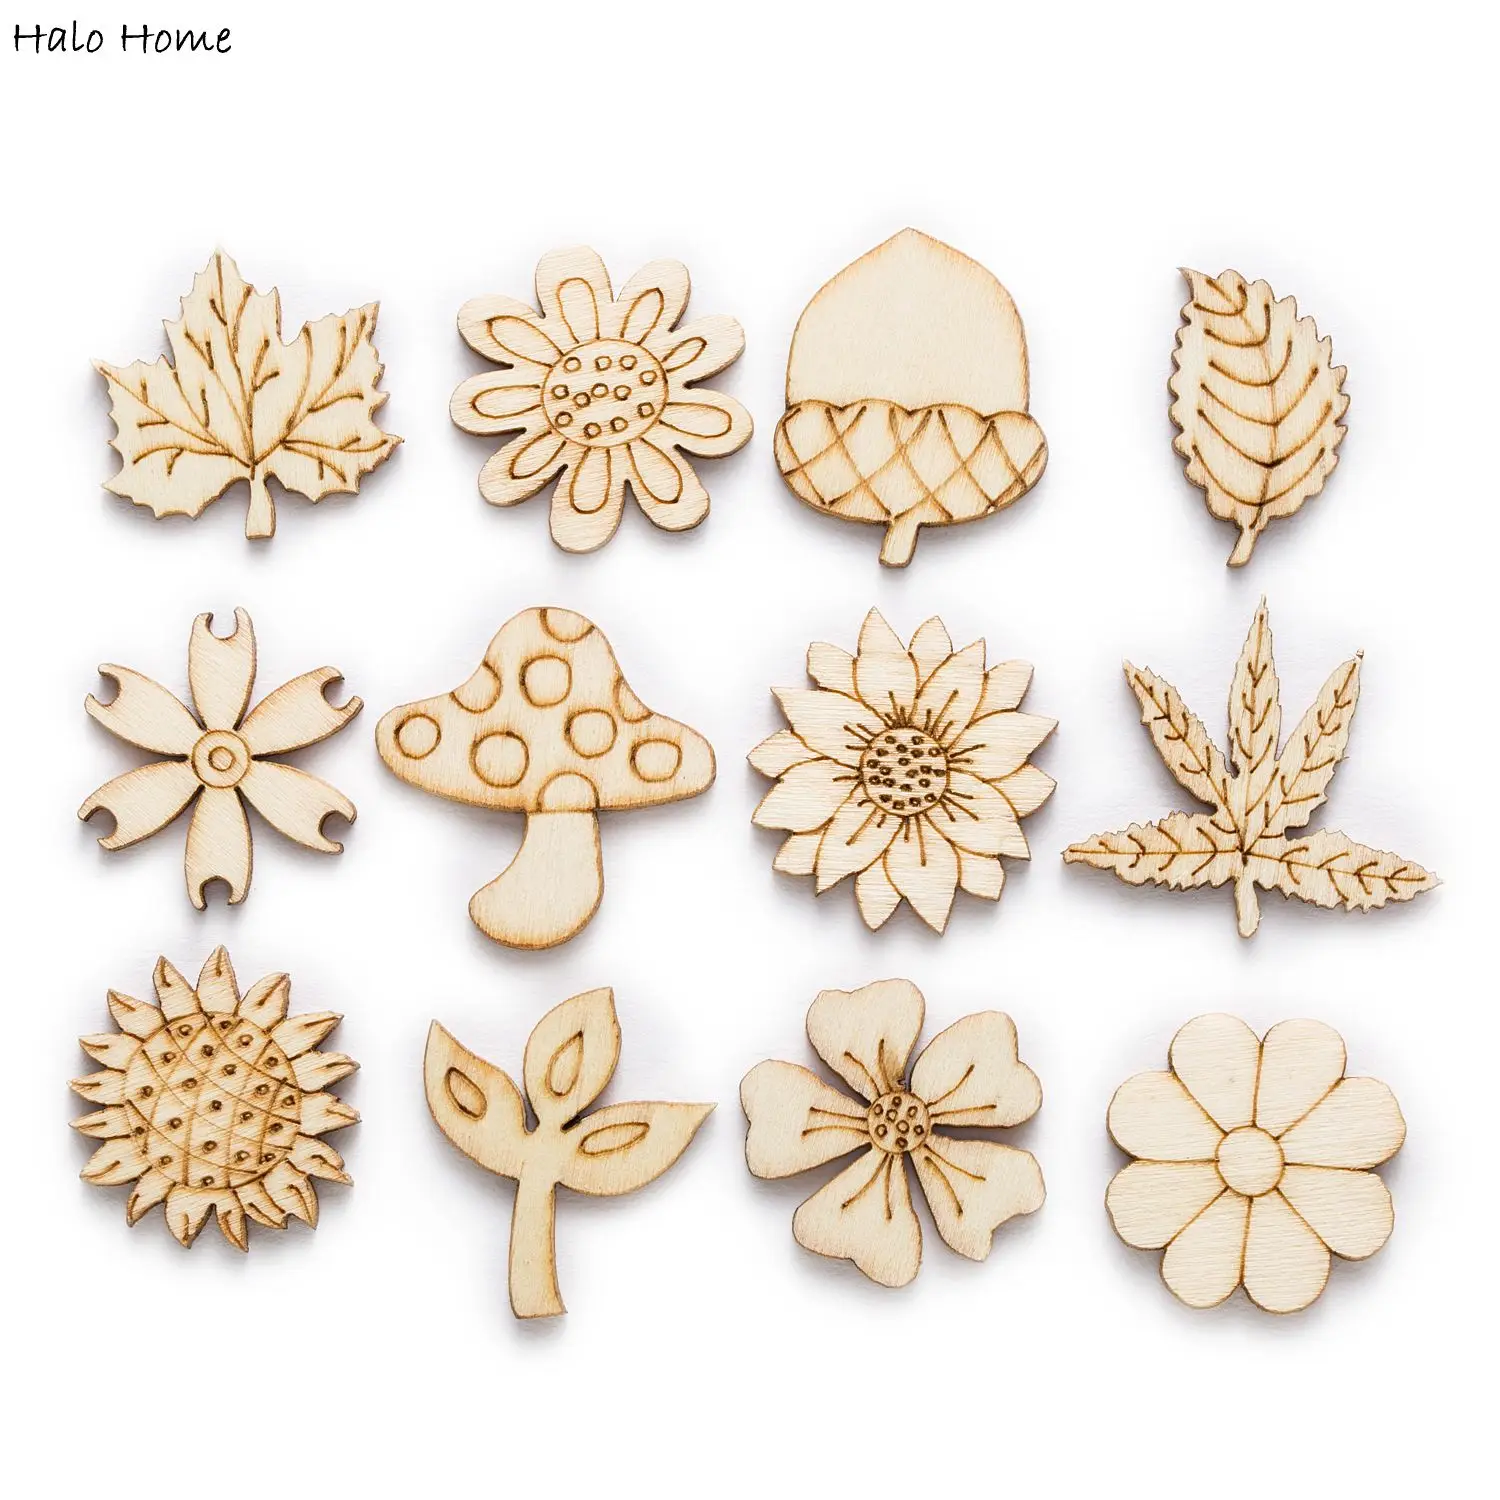 

30pcs Wooden Chips Plant Theme Theme buttons Sewing Hanging Ornaments Scrapbook Crafts Home Painting Decor Accessories 20-30mm